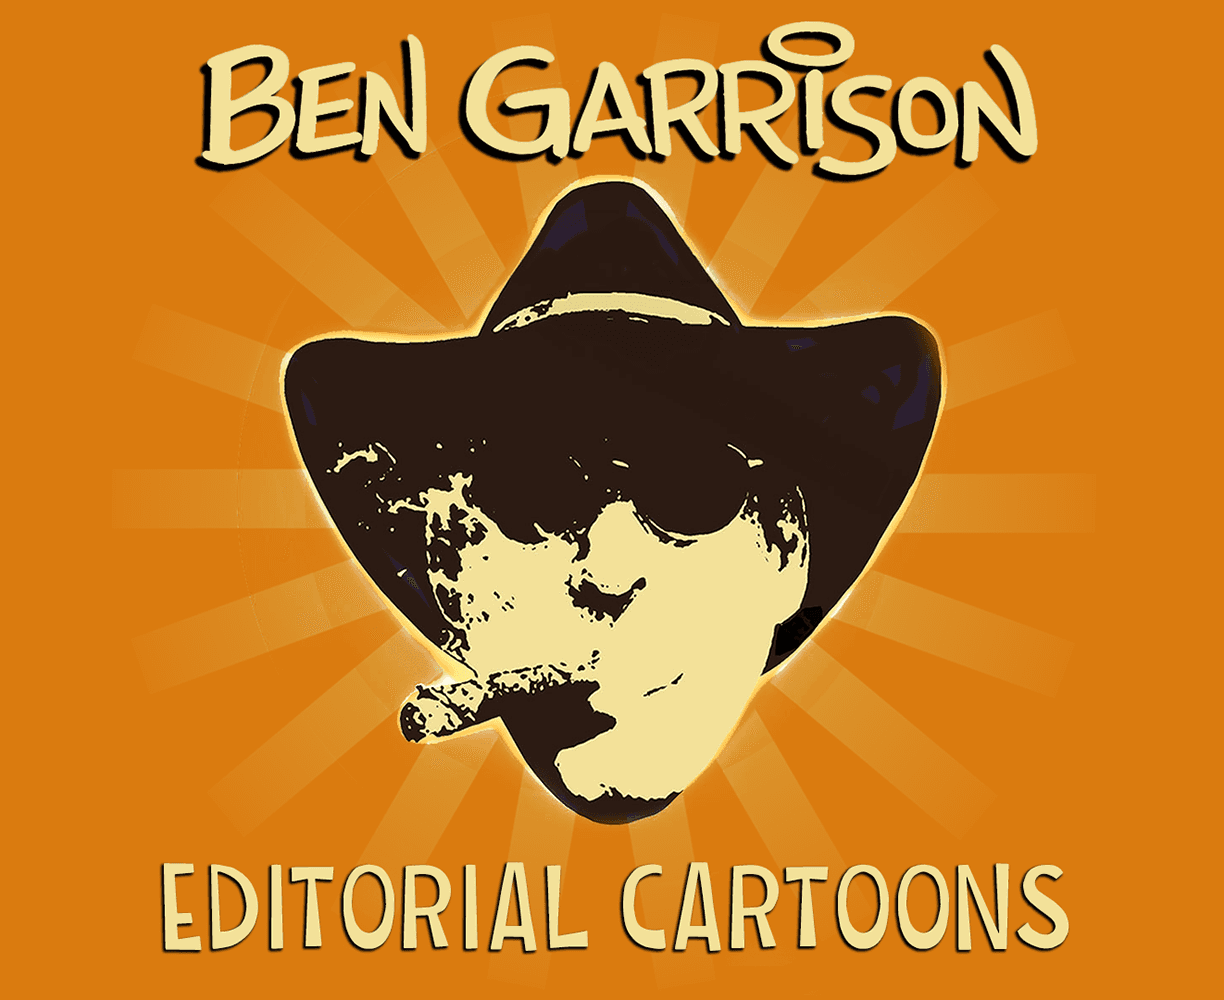 The cover art for the episode Elon Musk Lays A Egg from the comics series Ben Garrison, which is number 136 in the series